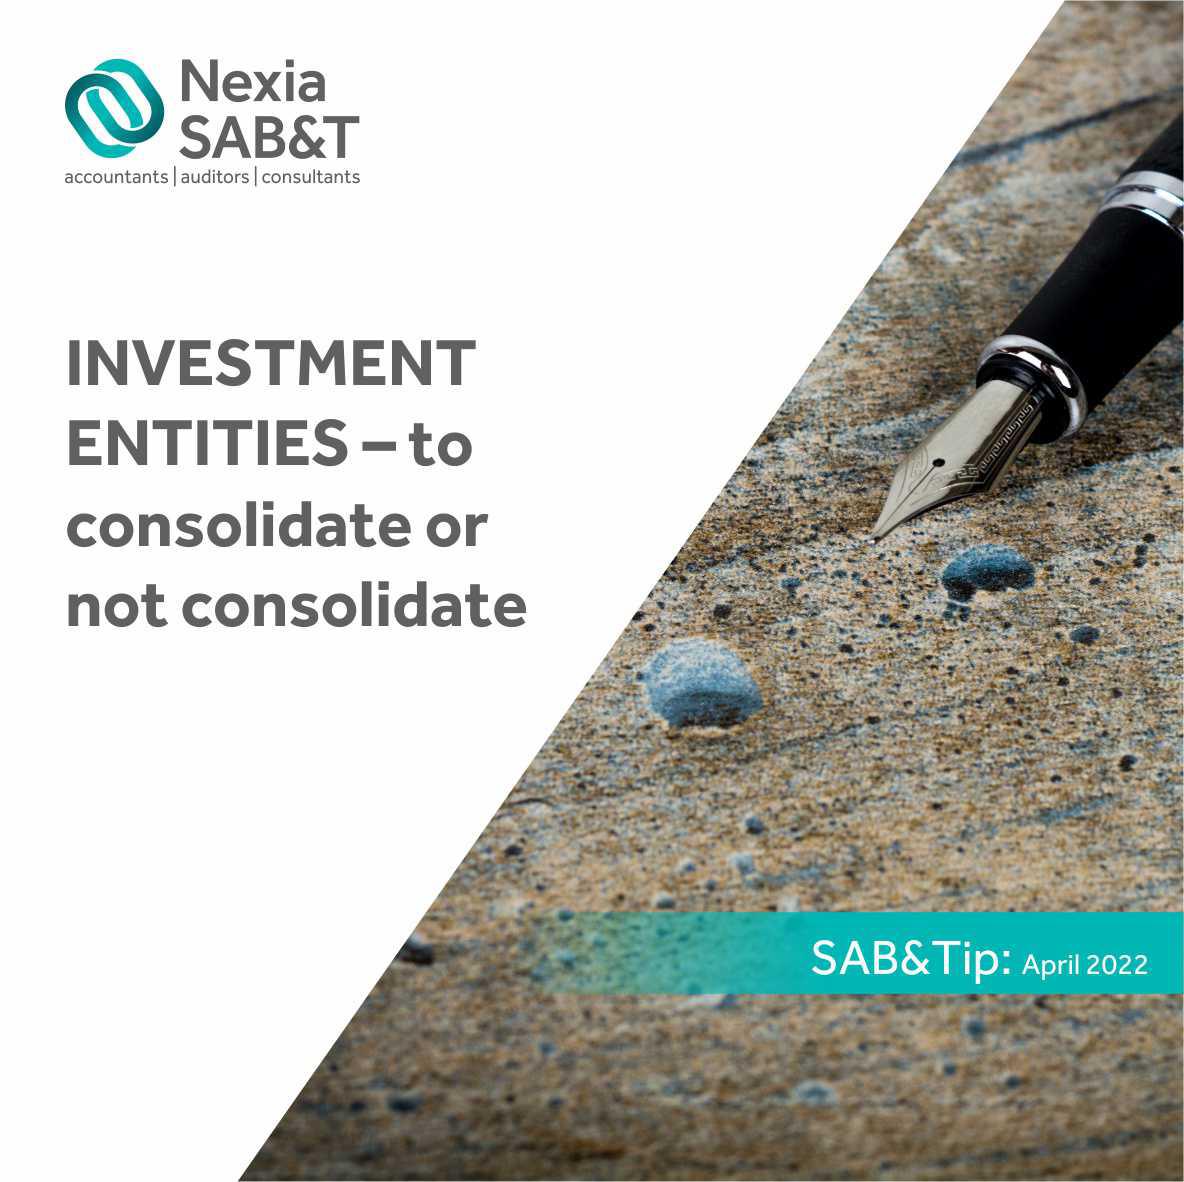 INVESTMENT ENTITIES – to consolidate or not consolidate